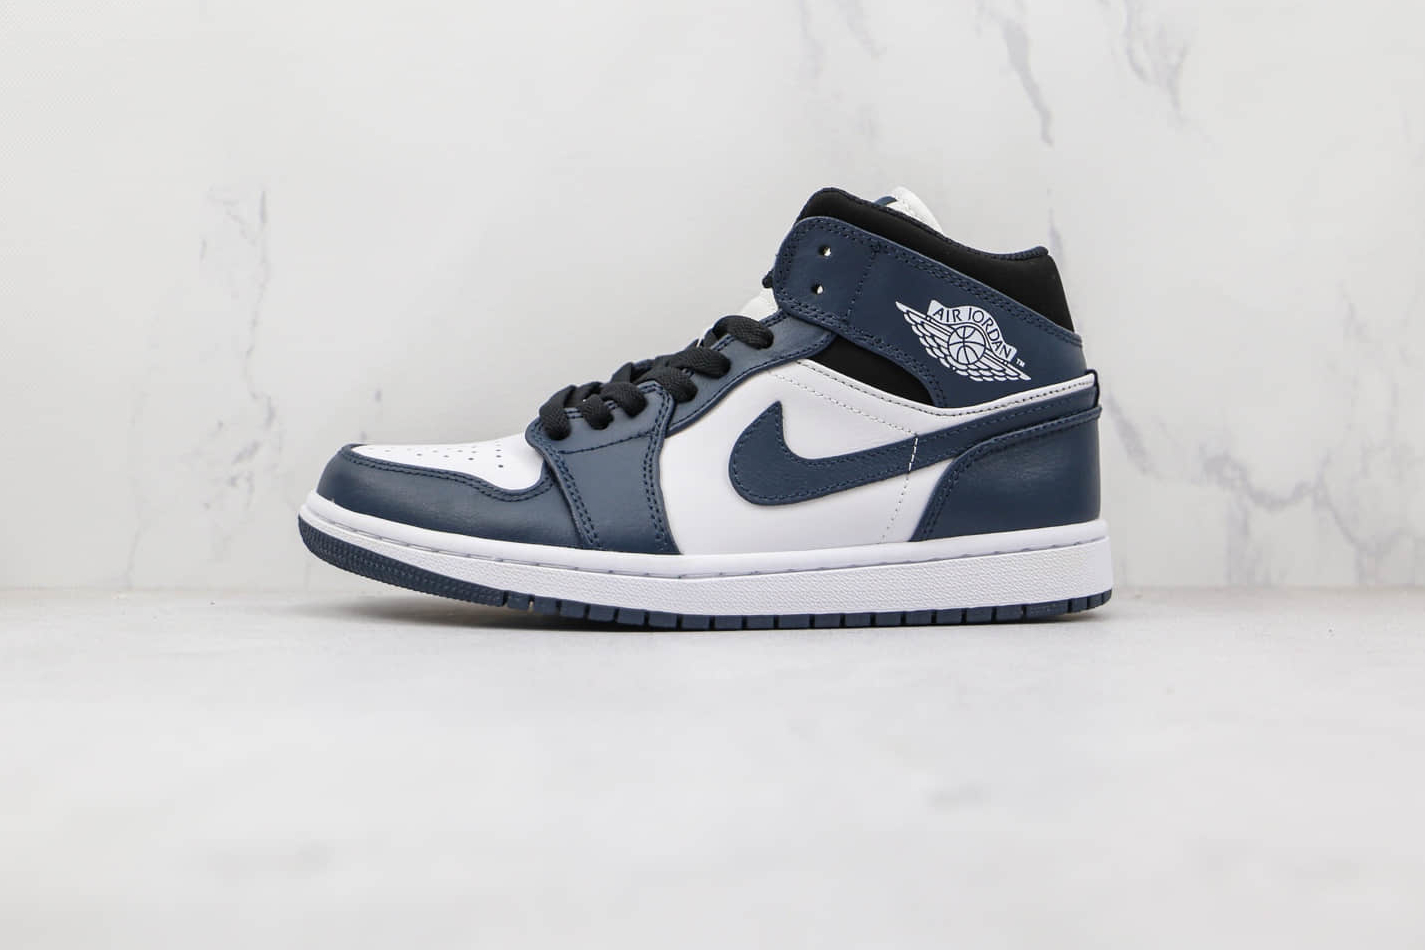 Air Jordan 1 Mid Armory Navy Dark Teal - 554724-411: Shop Now for Classic Style